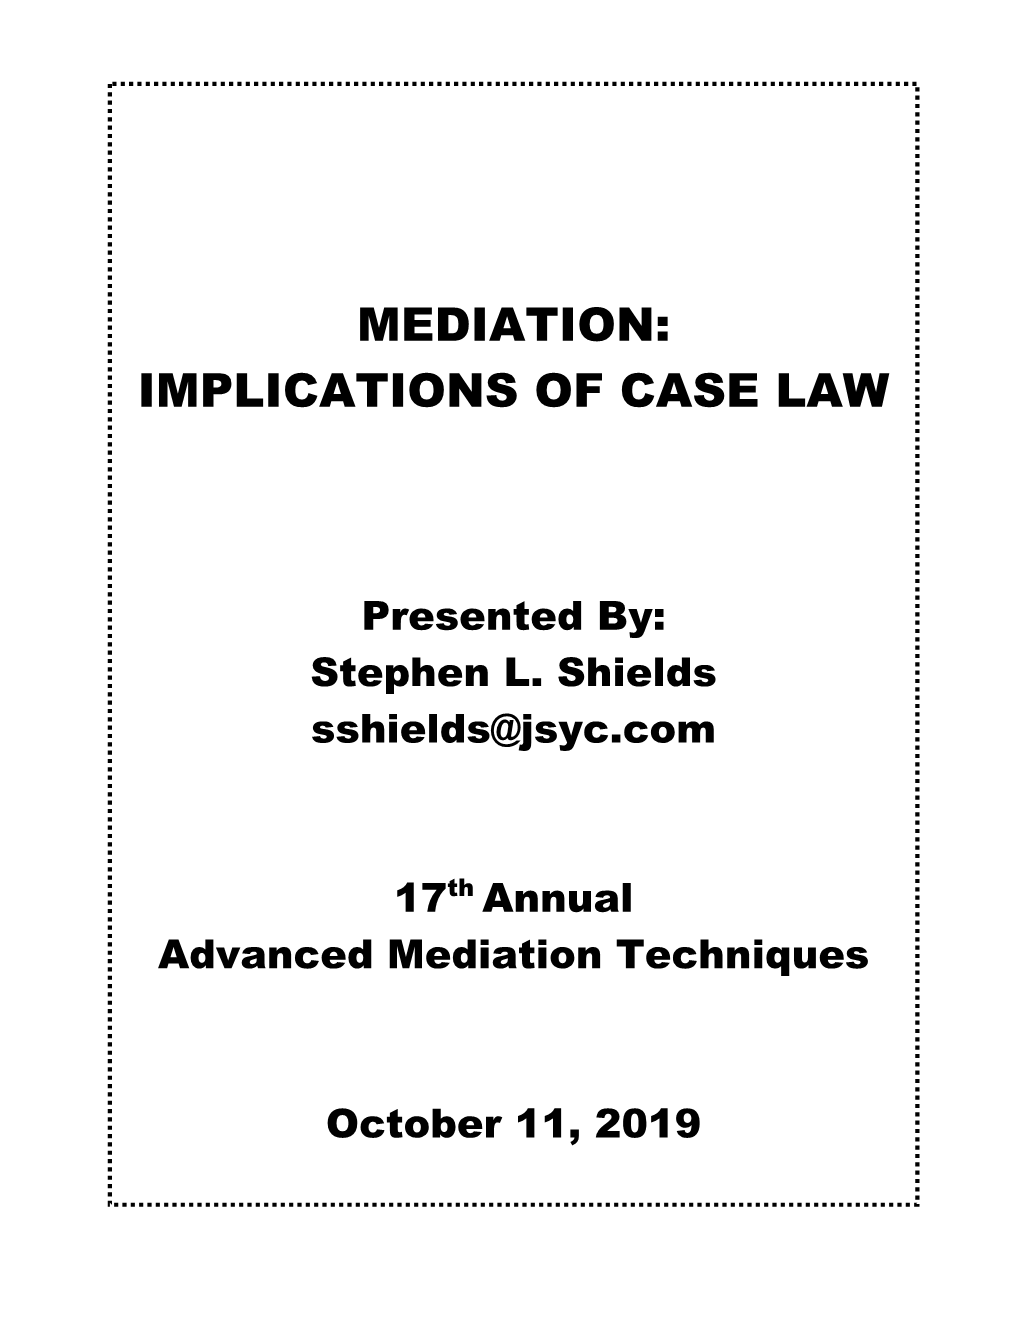 Mediation: Implications of Case Law